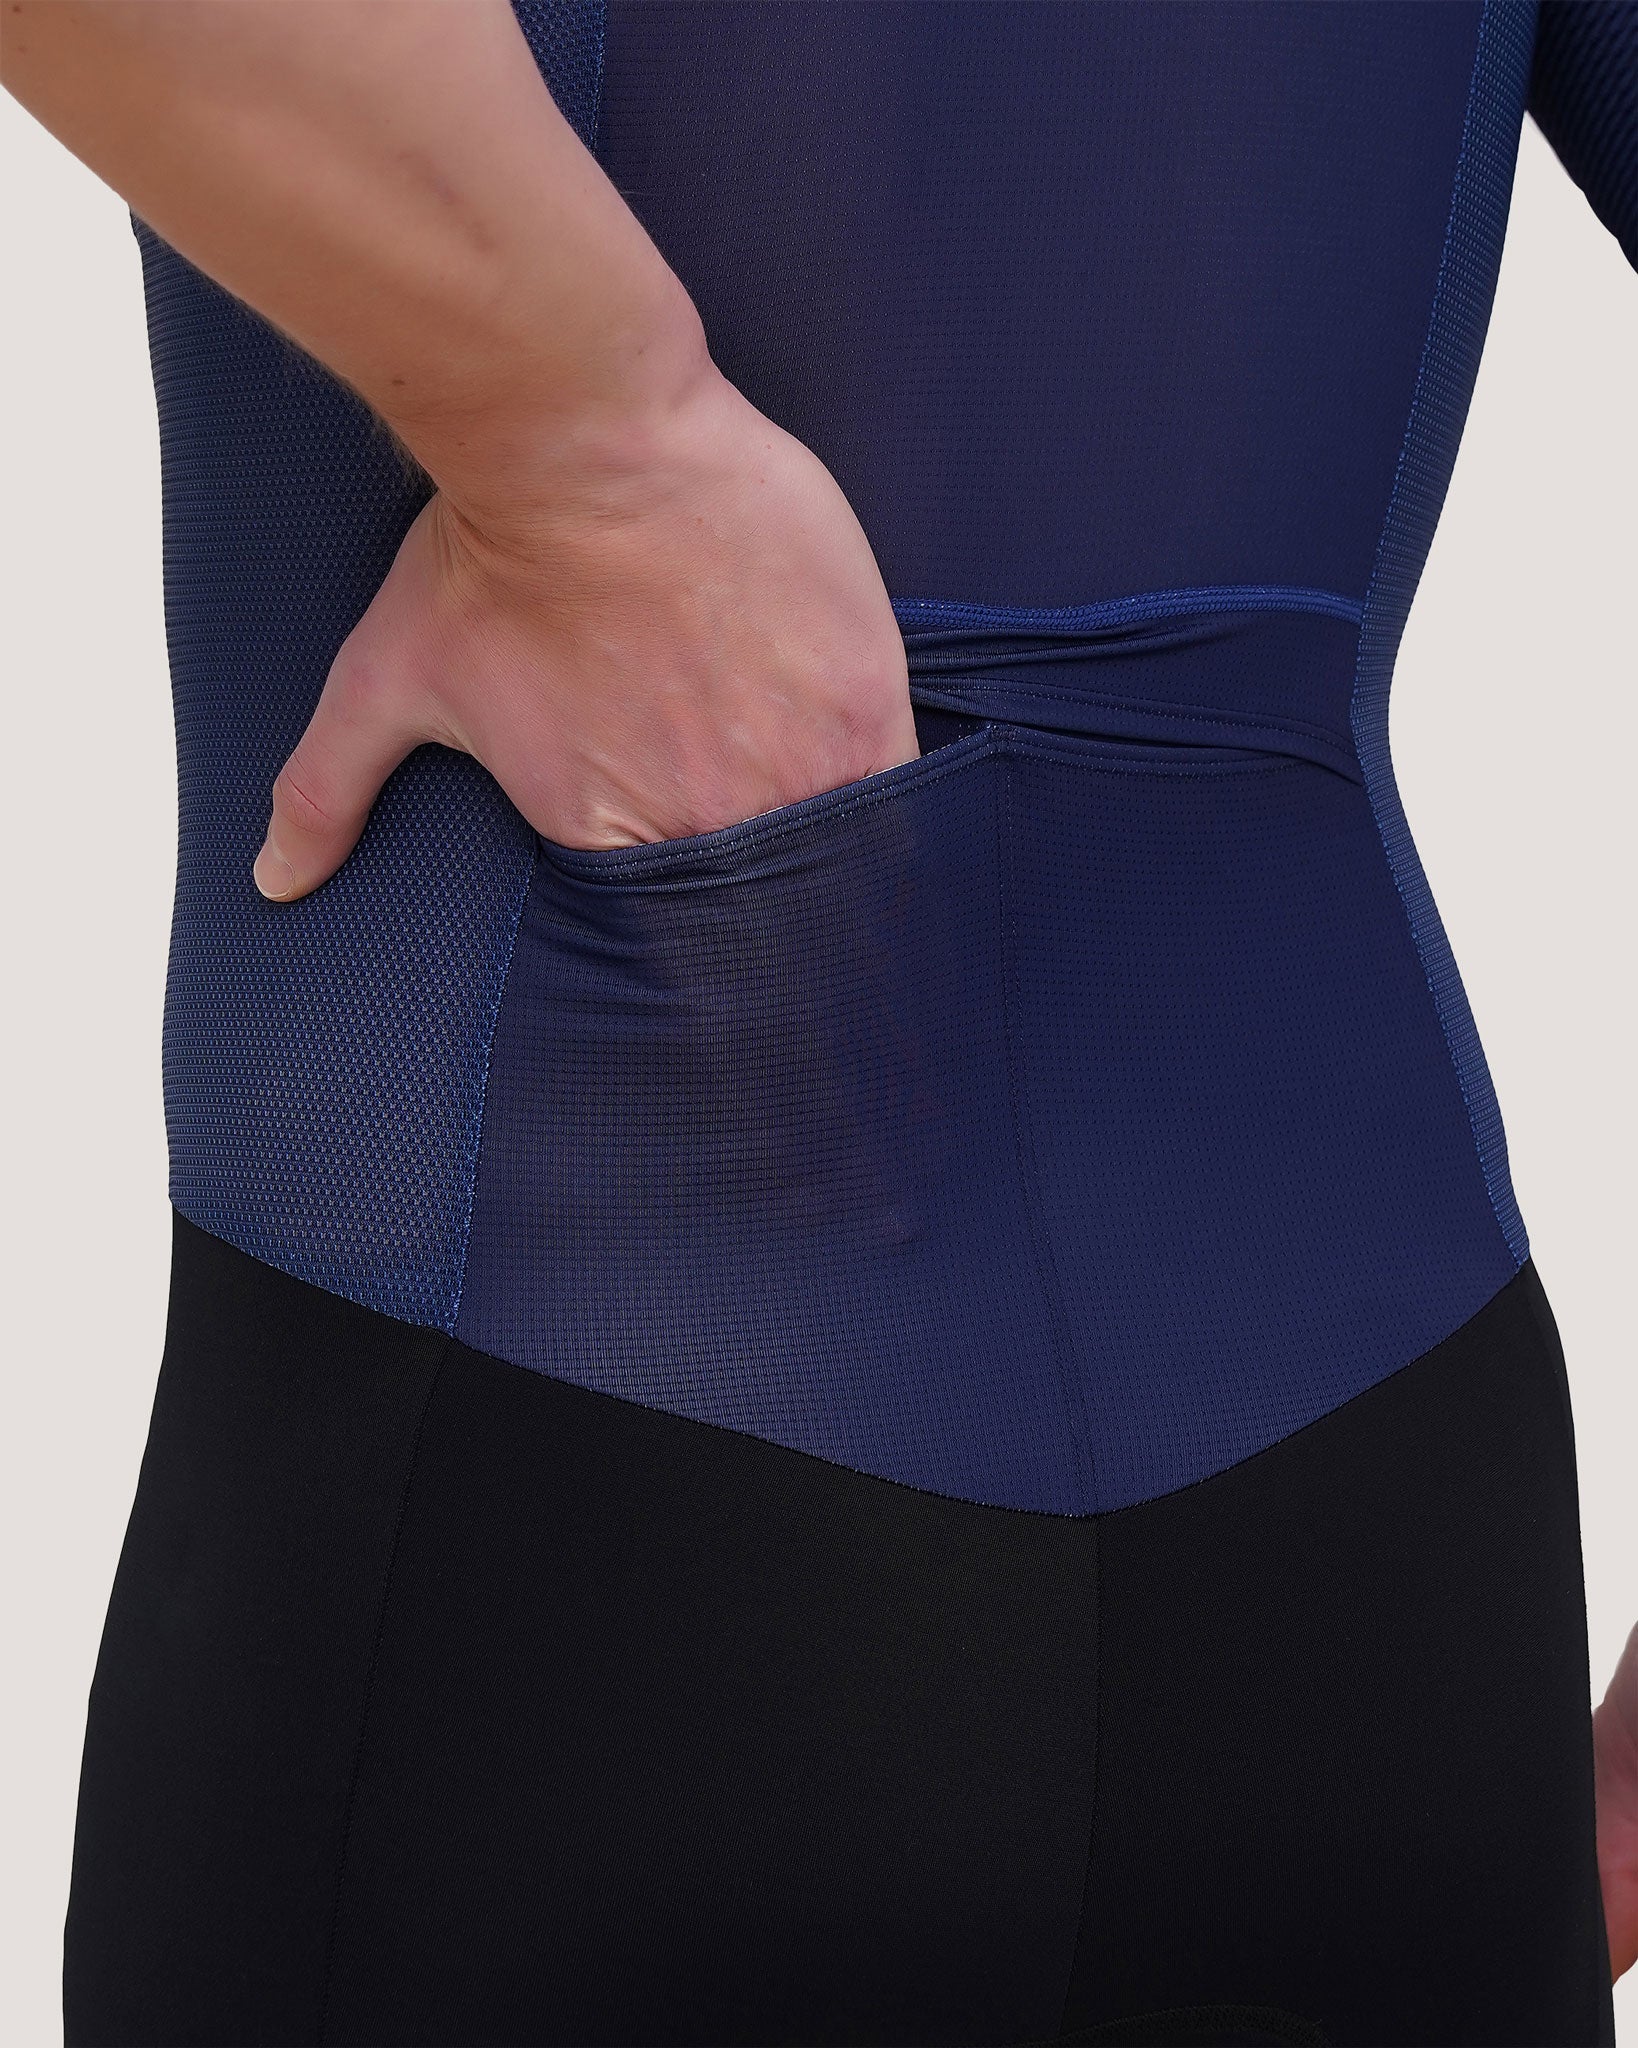 close up to the trisuit rear pocket